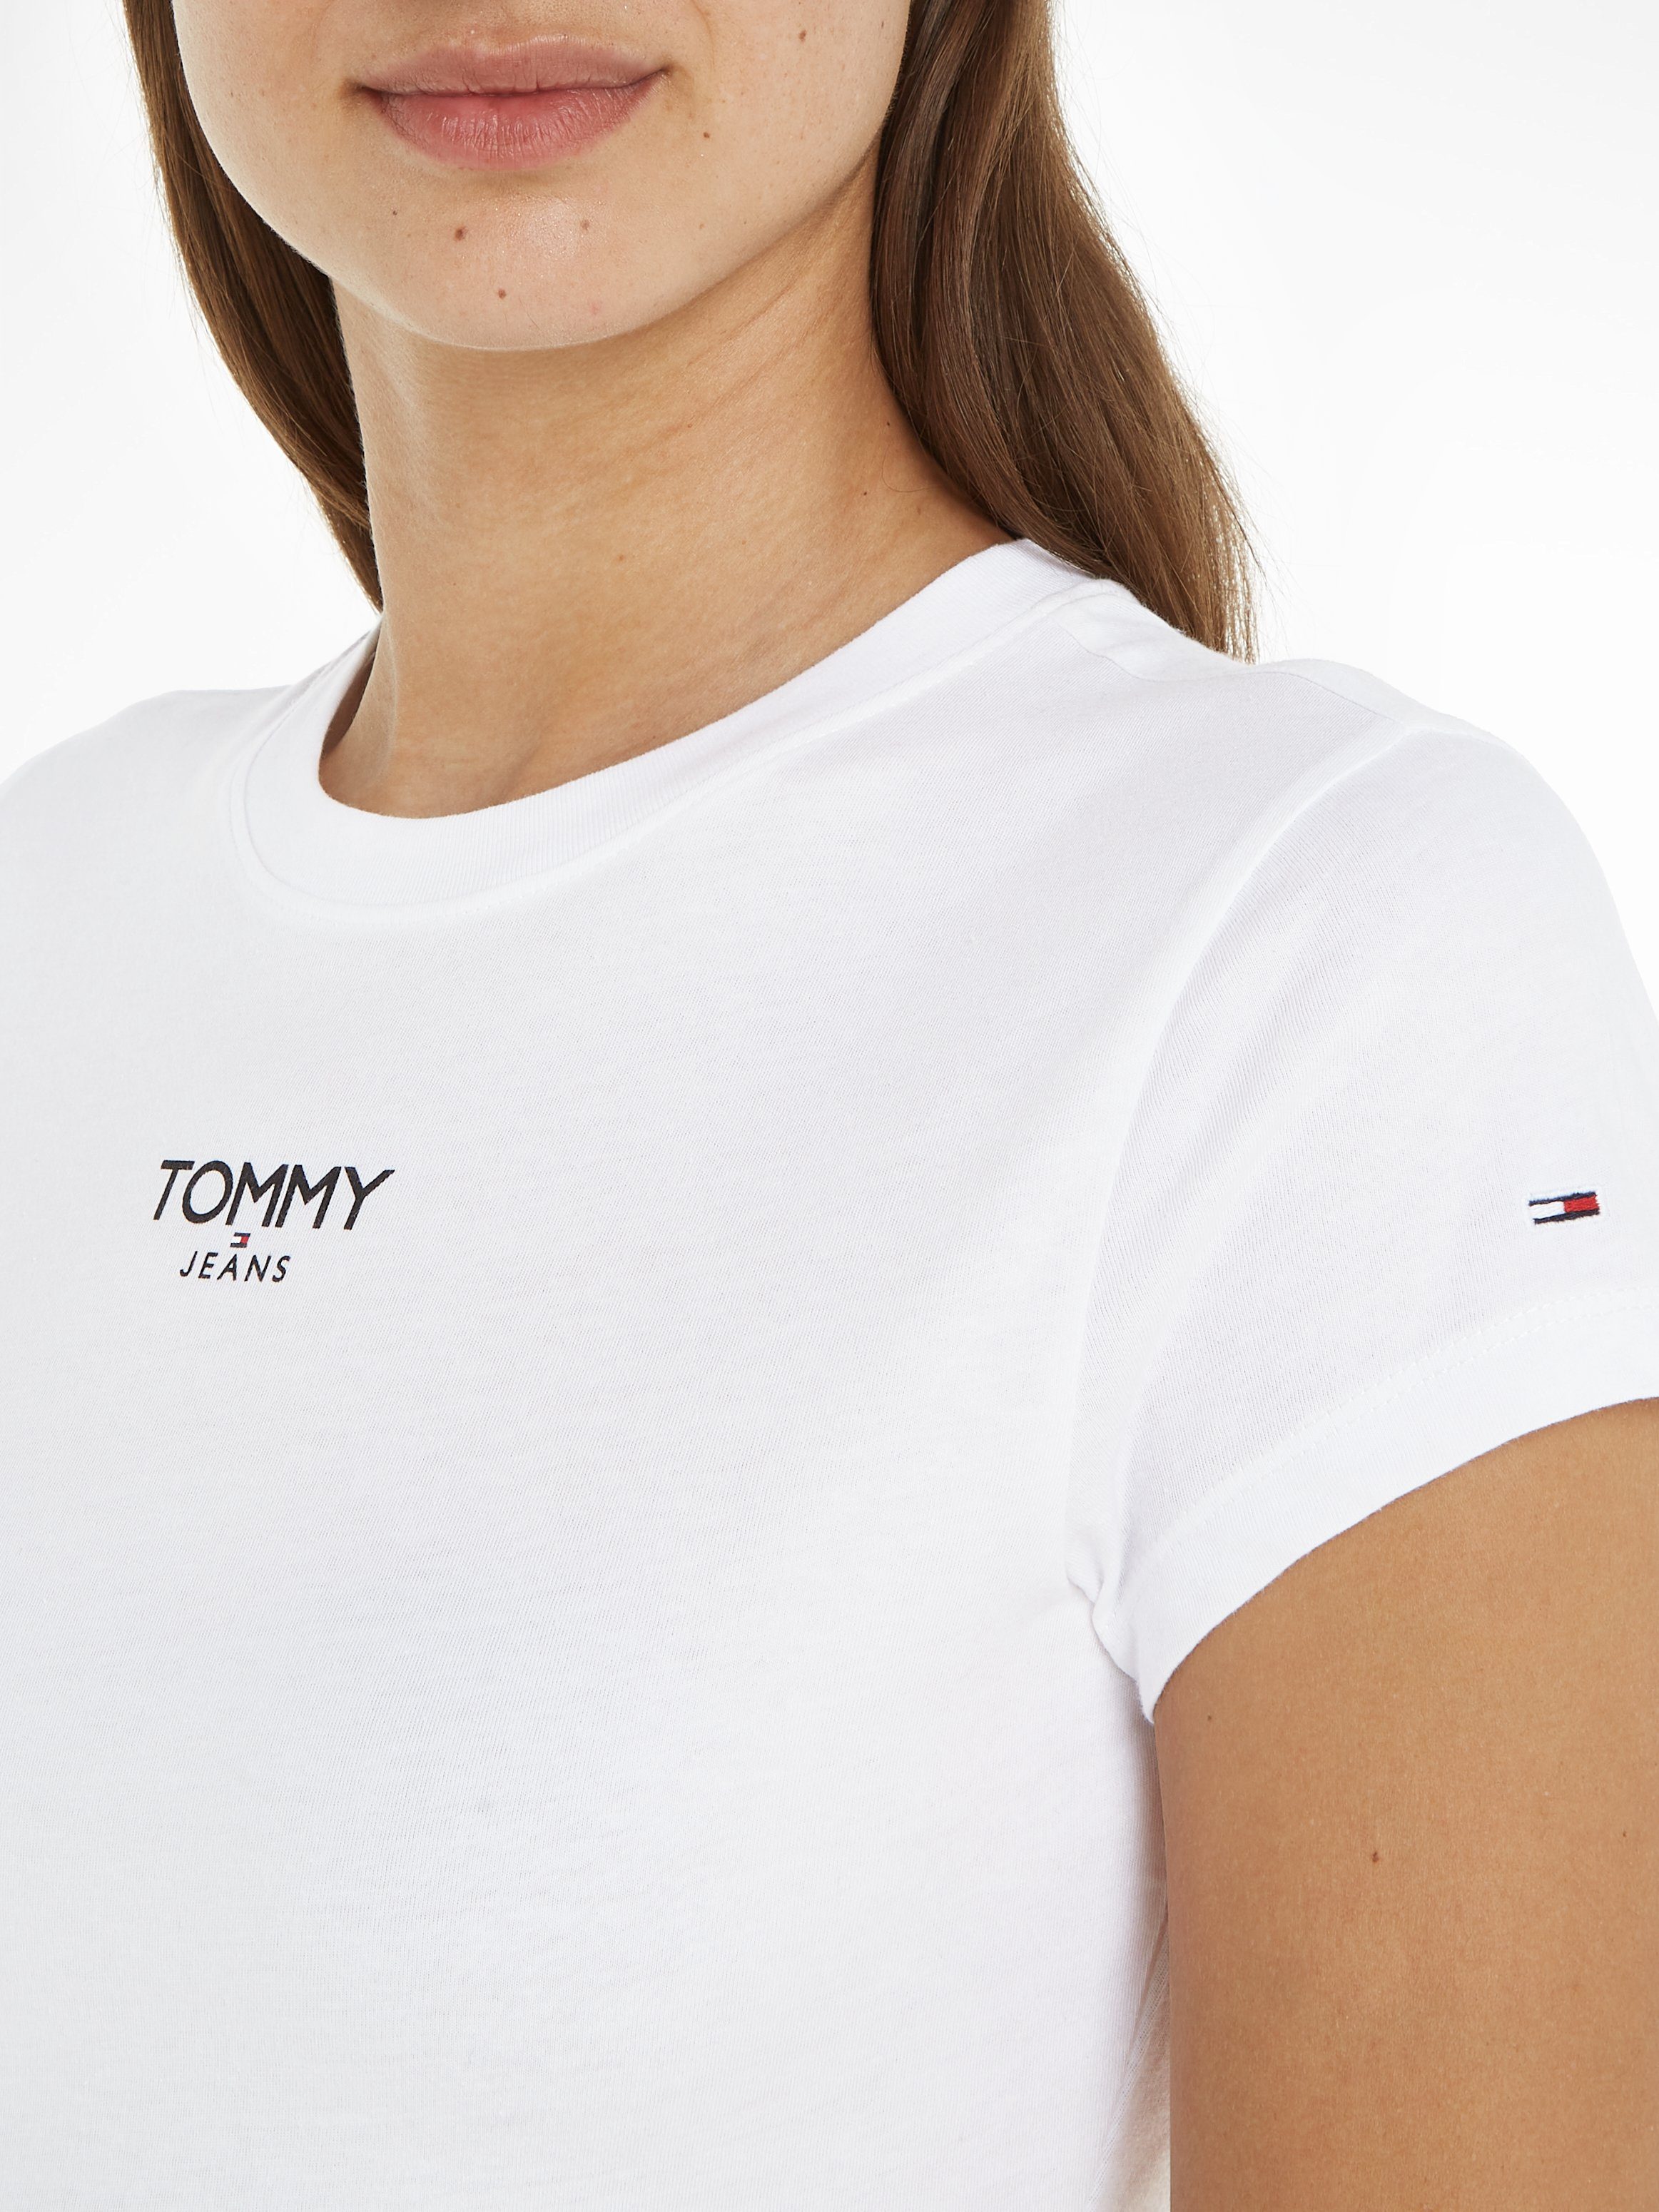 Tommy Jeans T-Shirt TJW BBY mit LOGO Logo White ESSENTIAL Tommy Jeans 1 SS